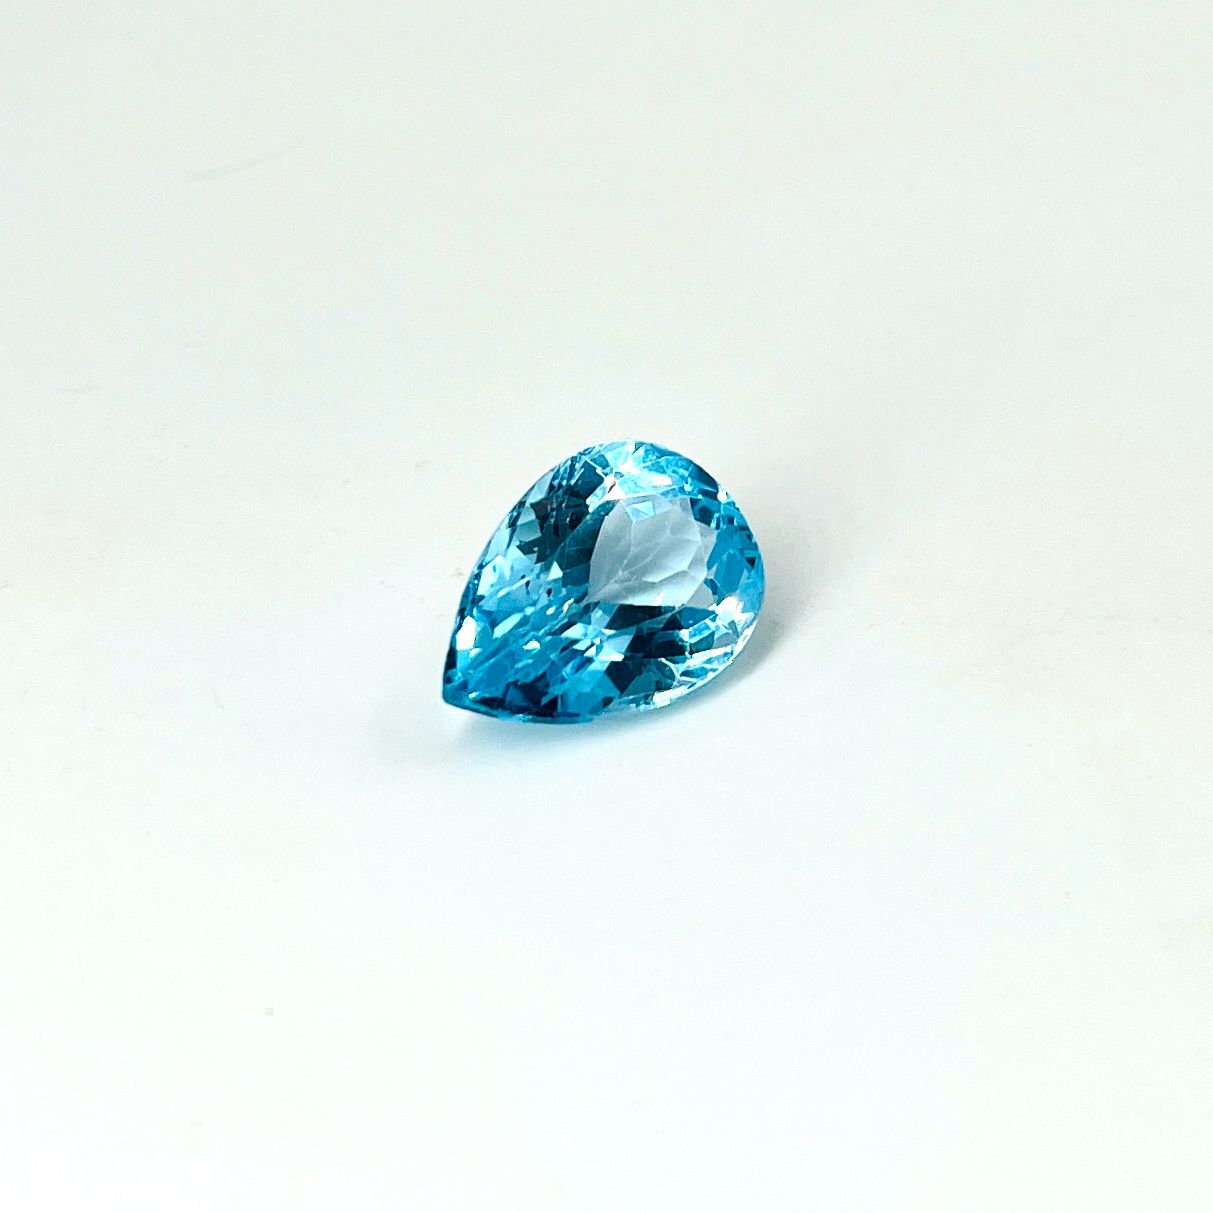 Null Pear cut blue topaz weighing 23.38 carats. Dimensions: 2.2 x 1.5 cm